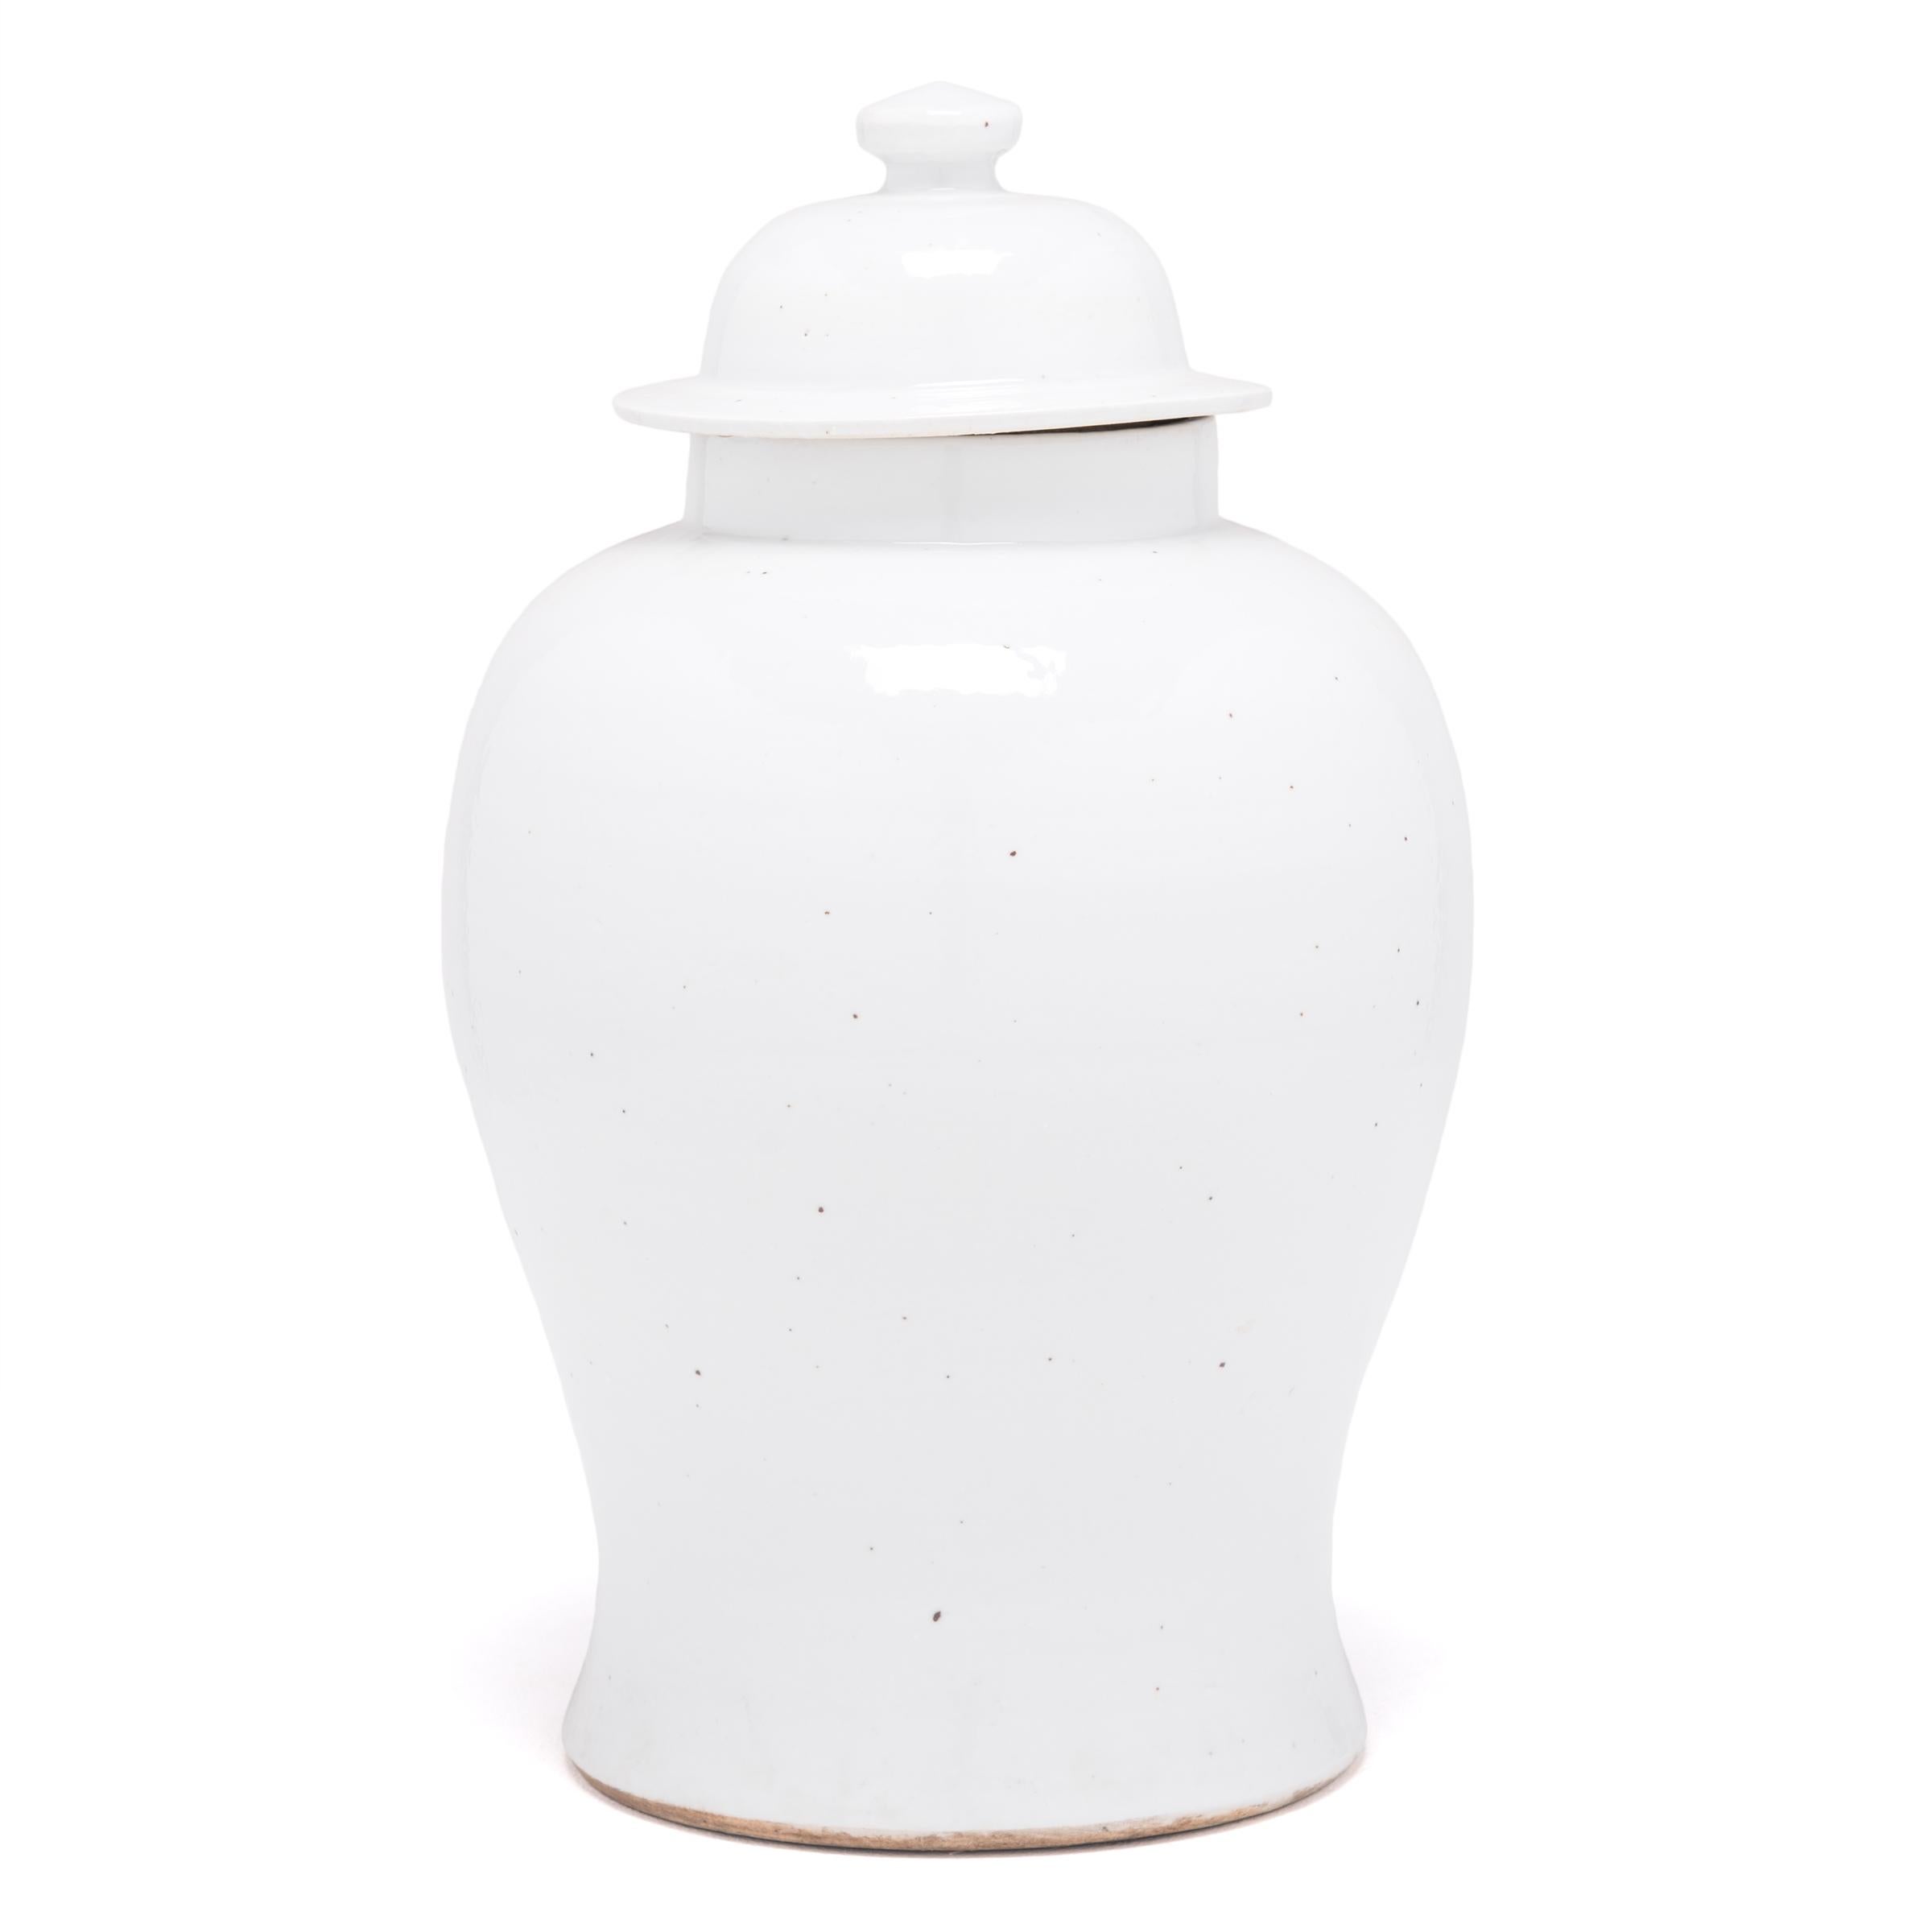 Defined by its rounded body, high shoulders and domed lid, the time-honored look of the Chinese baluster jar takes on a streamlined look in this contemporary interpretation. Traditionally elaborately decorated, this modern take is cloaked in a